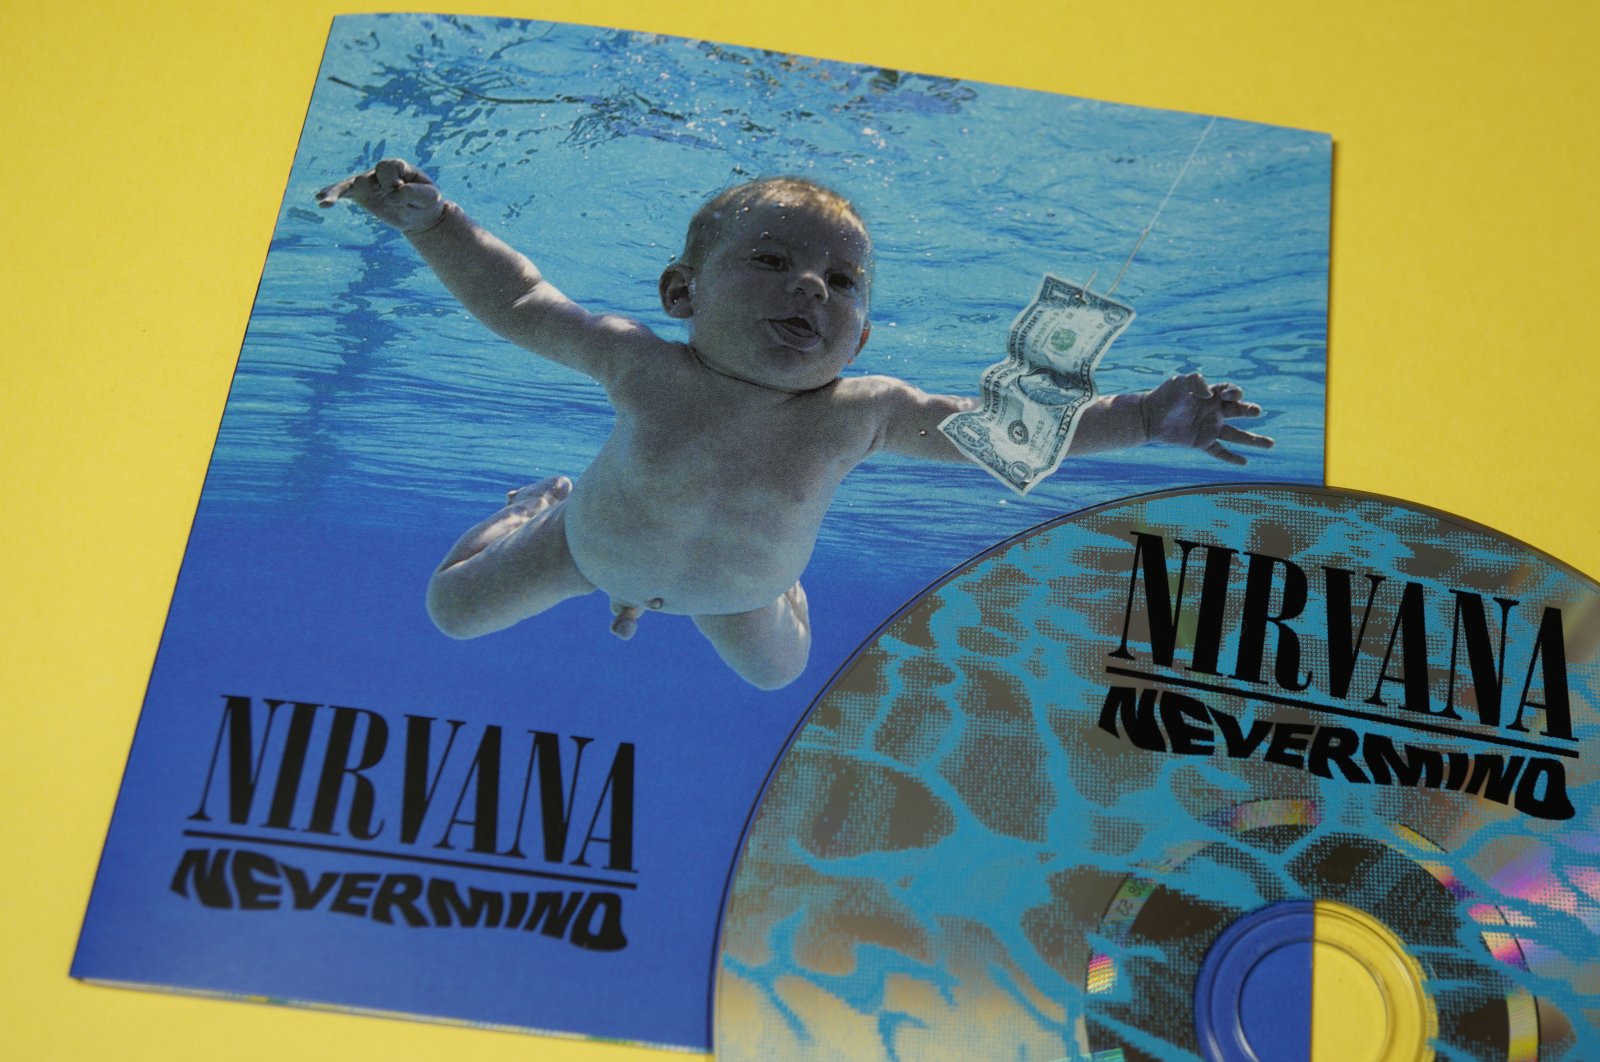 The cover and cd of the "Nevermind" album by Nirvana, Rome, Italy, Aug. 5, 2021. (Shutterstock) 